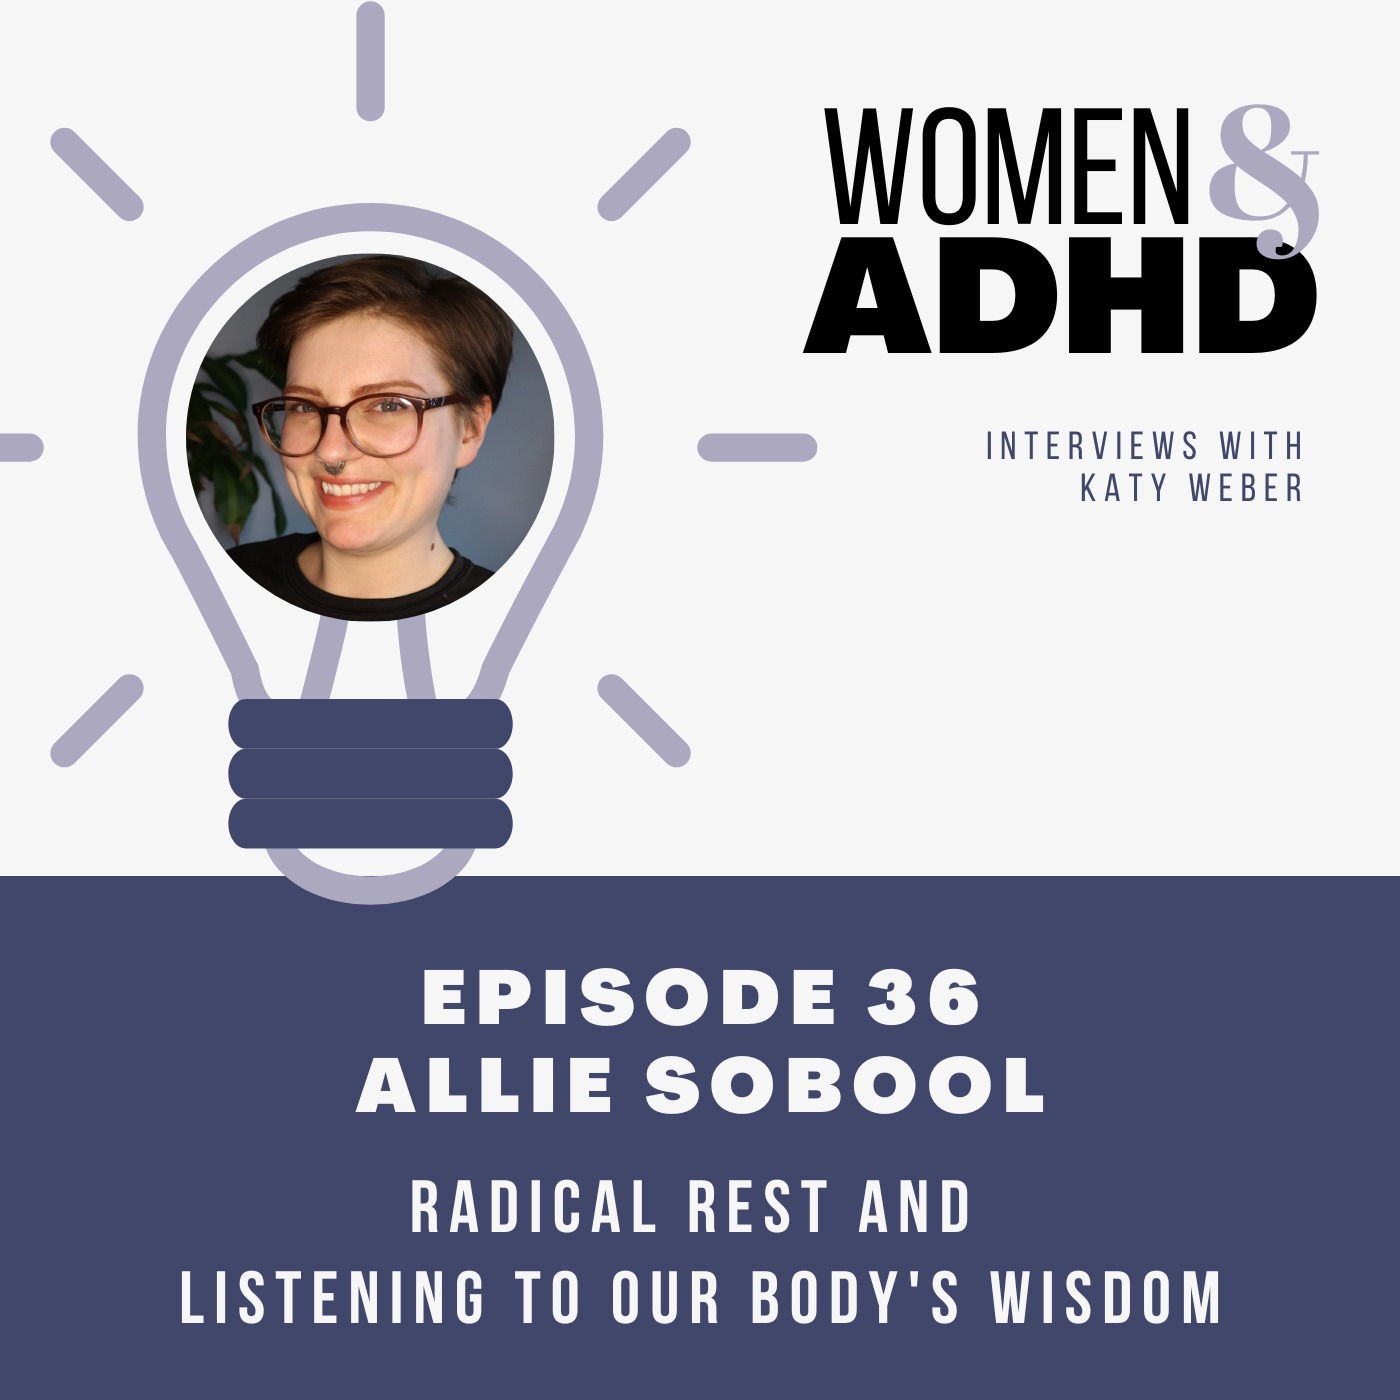 Allie Sobool: Radical rest and listening to our body’s wisdom